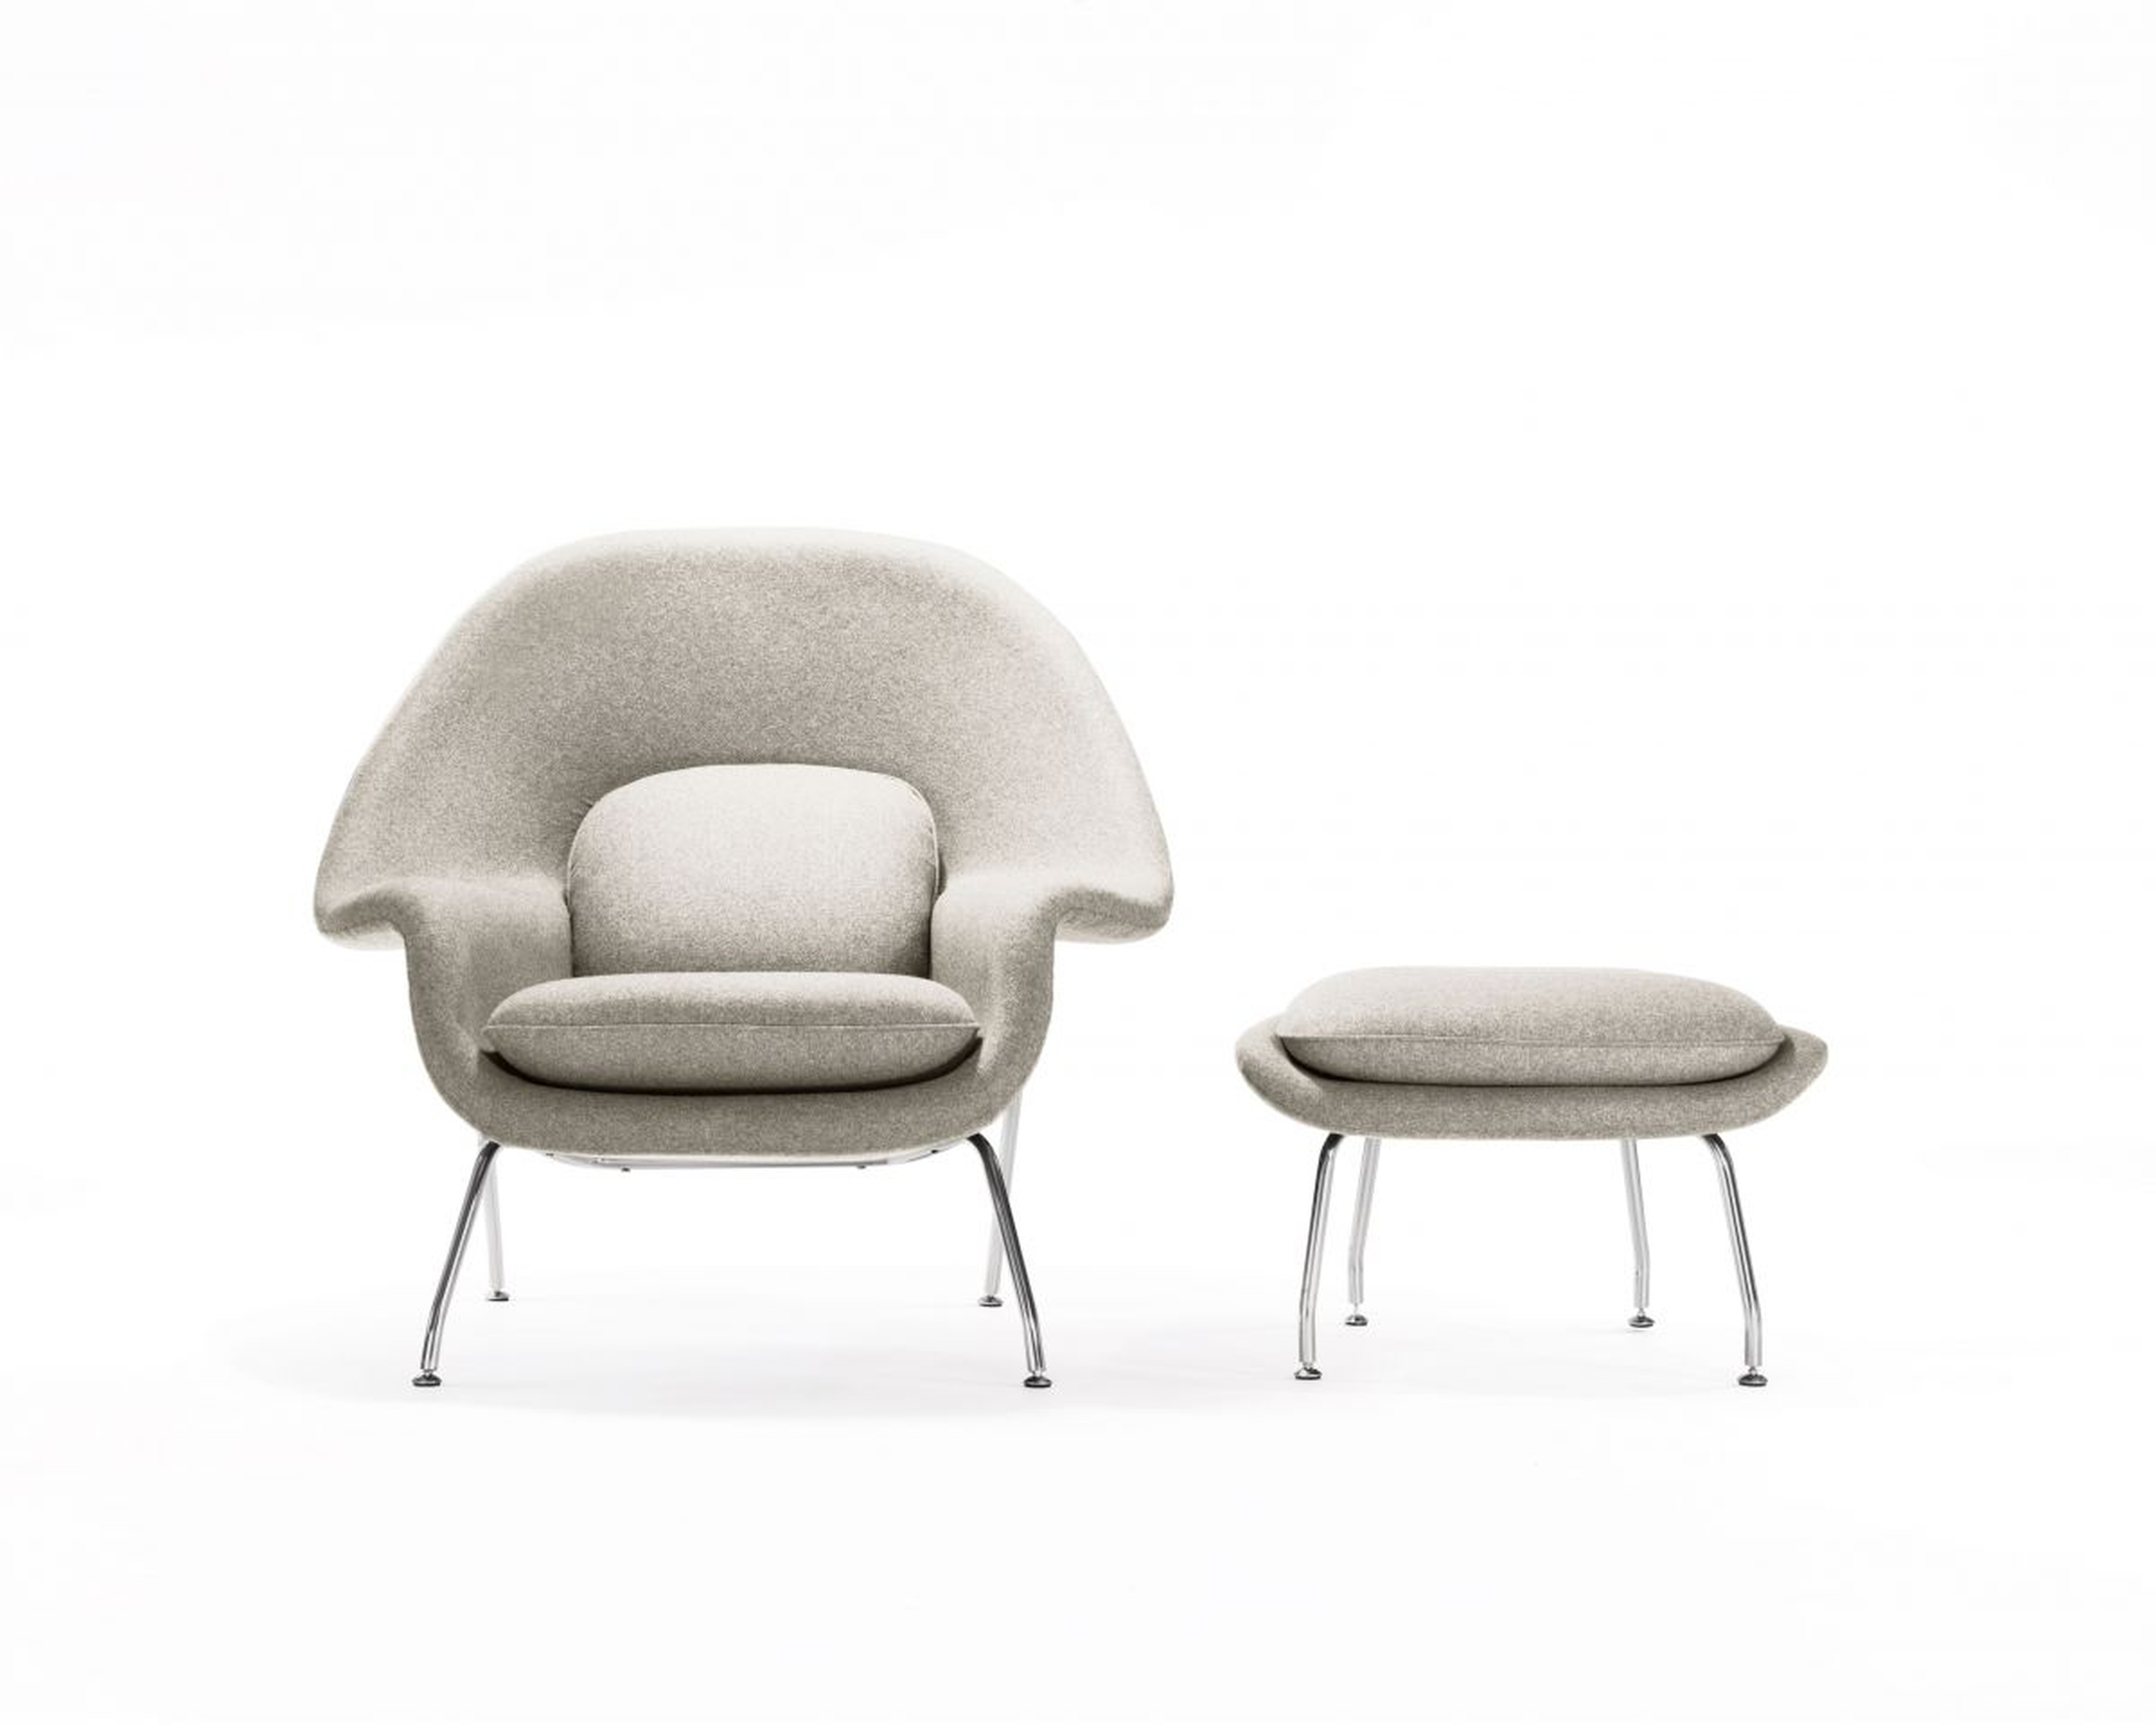 Womb Chair And Ottoman - Smoky Quartz - Rove Concepts